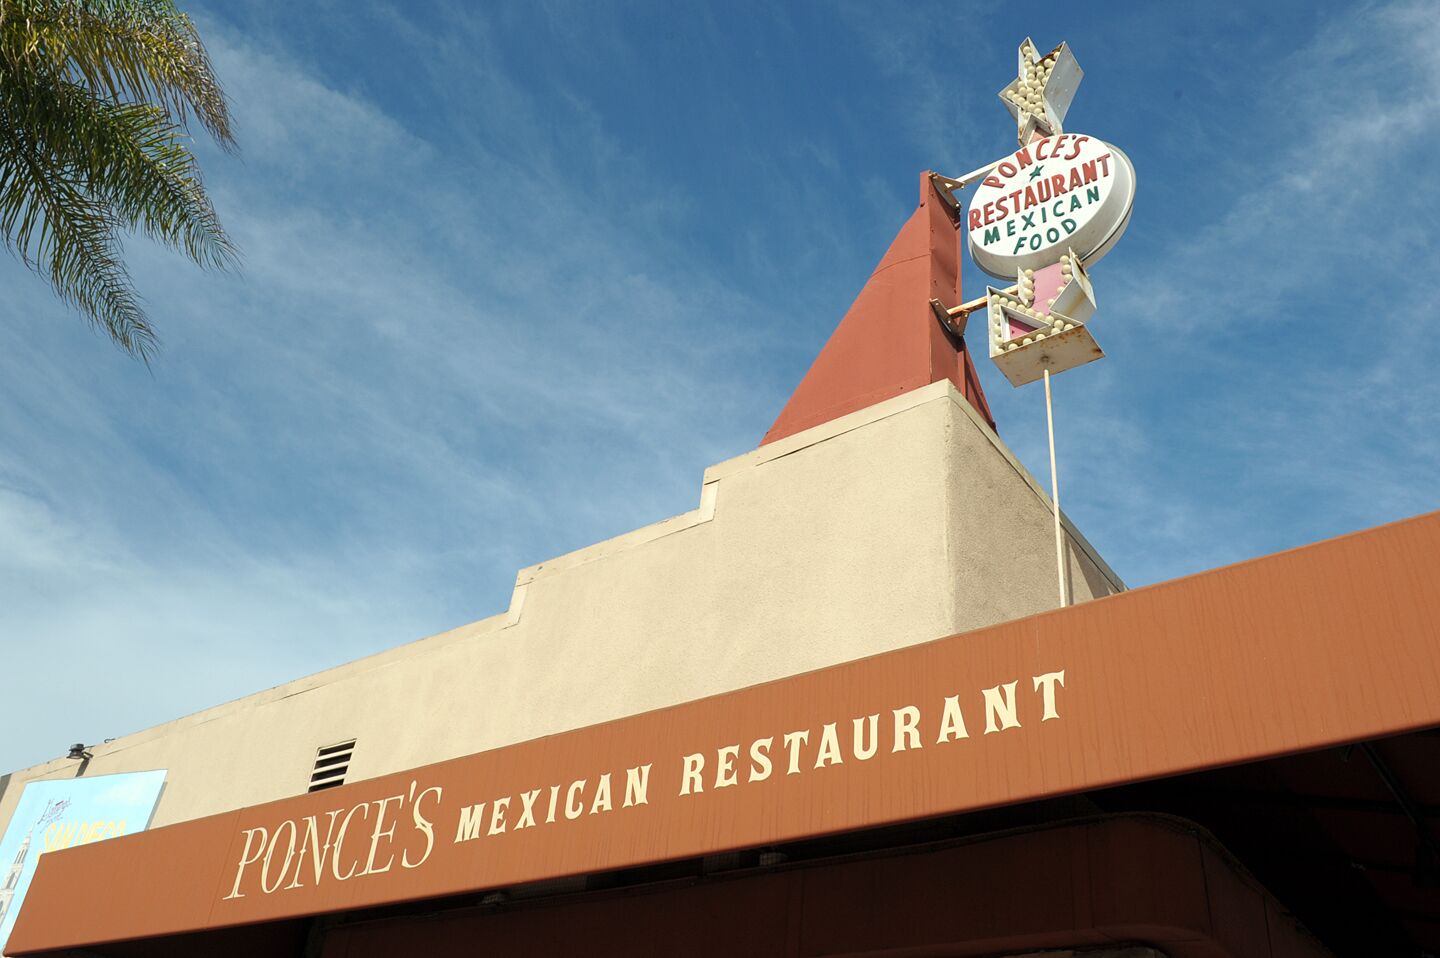 Iconic spot Ponce's Mexican Restaurant celebrated its 50th anniversary in Kensington on Sunday, Sept. 15, 2019.